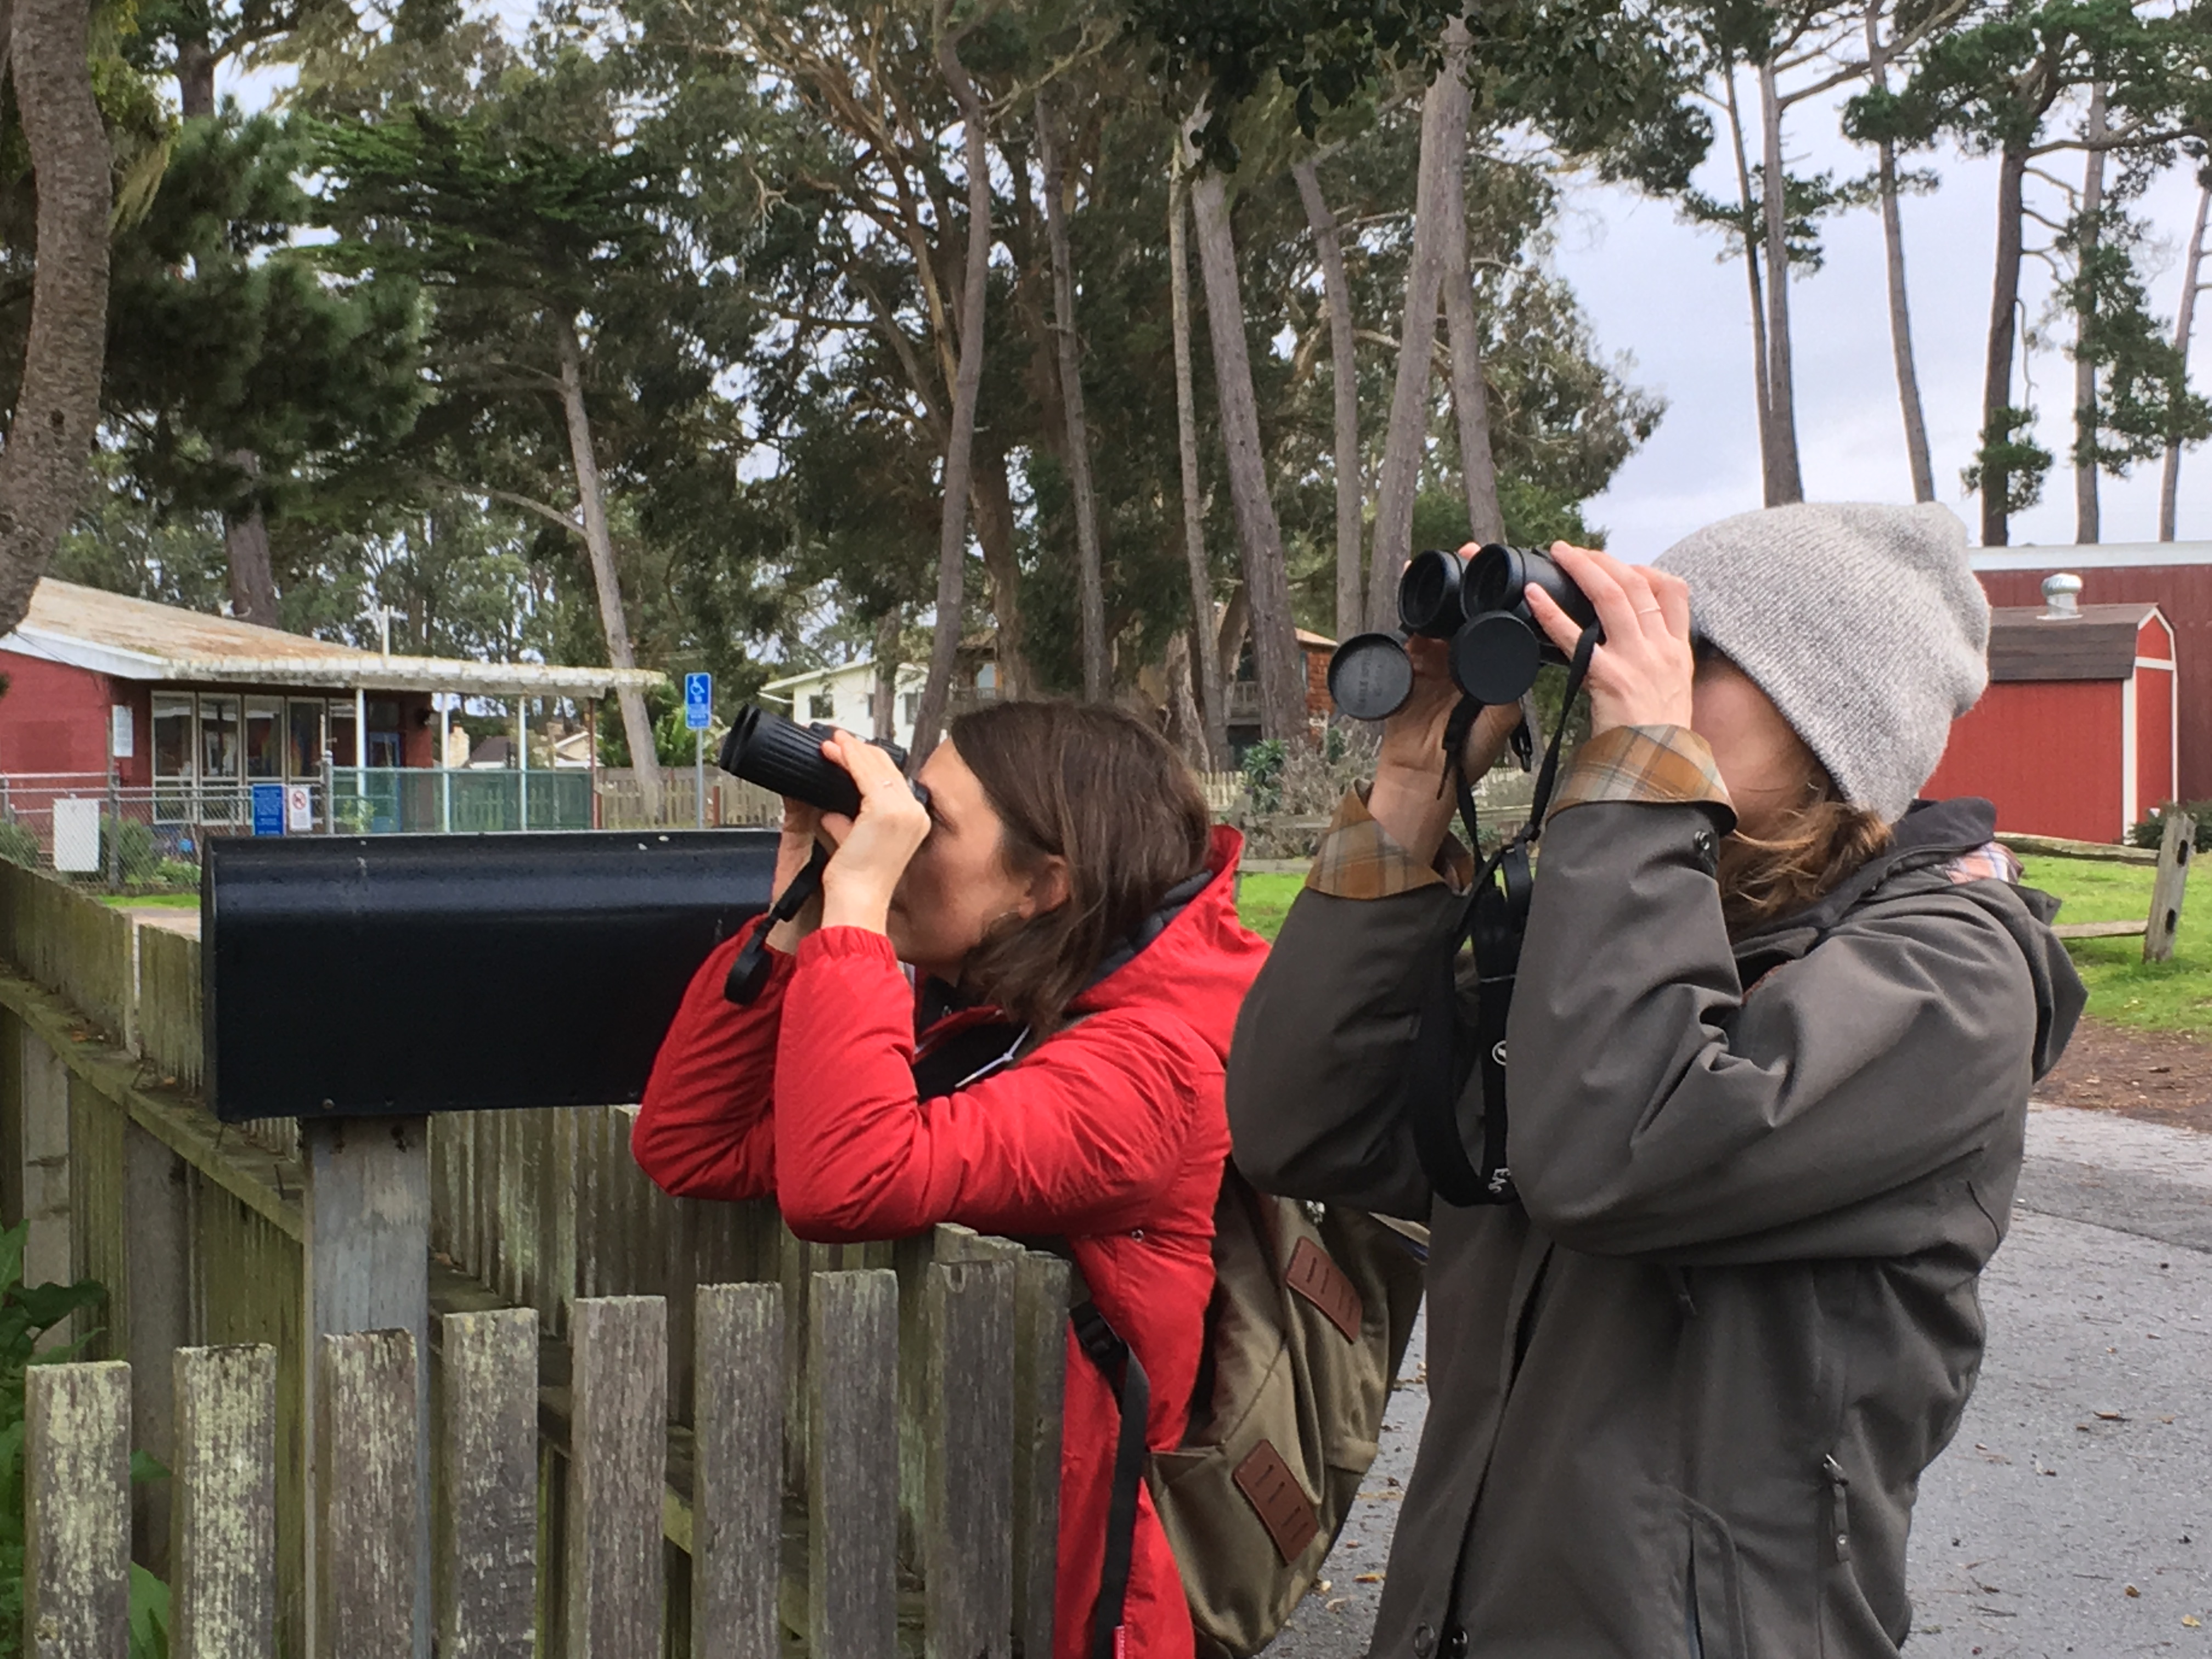 Two women in coats with warm hats peer through binoculars, while leaning on a short wooden fence.